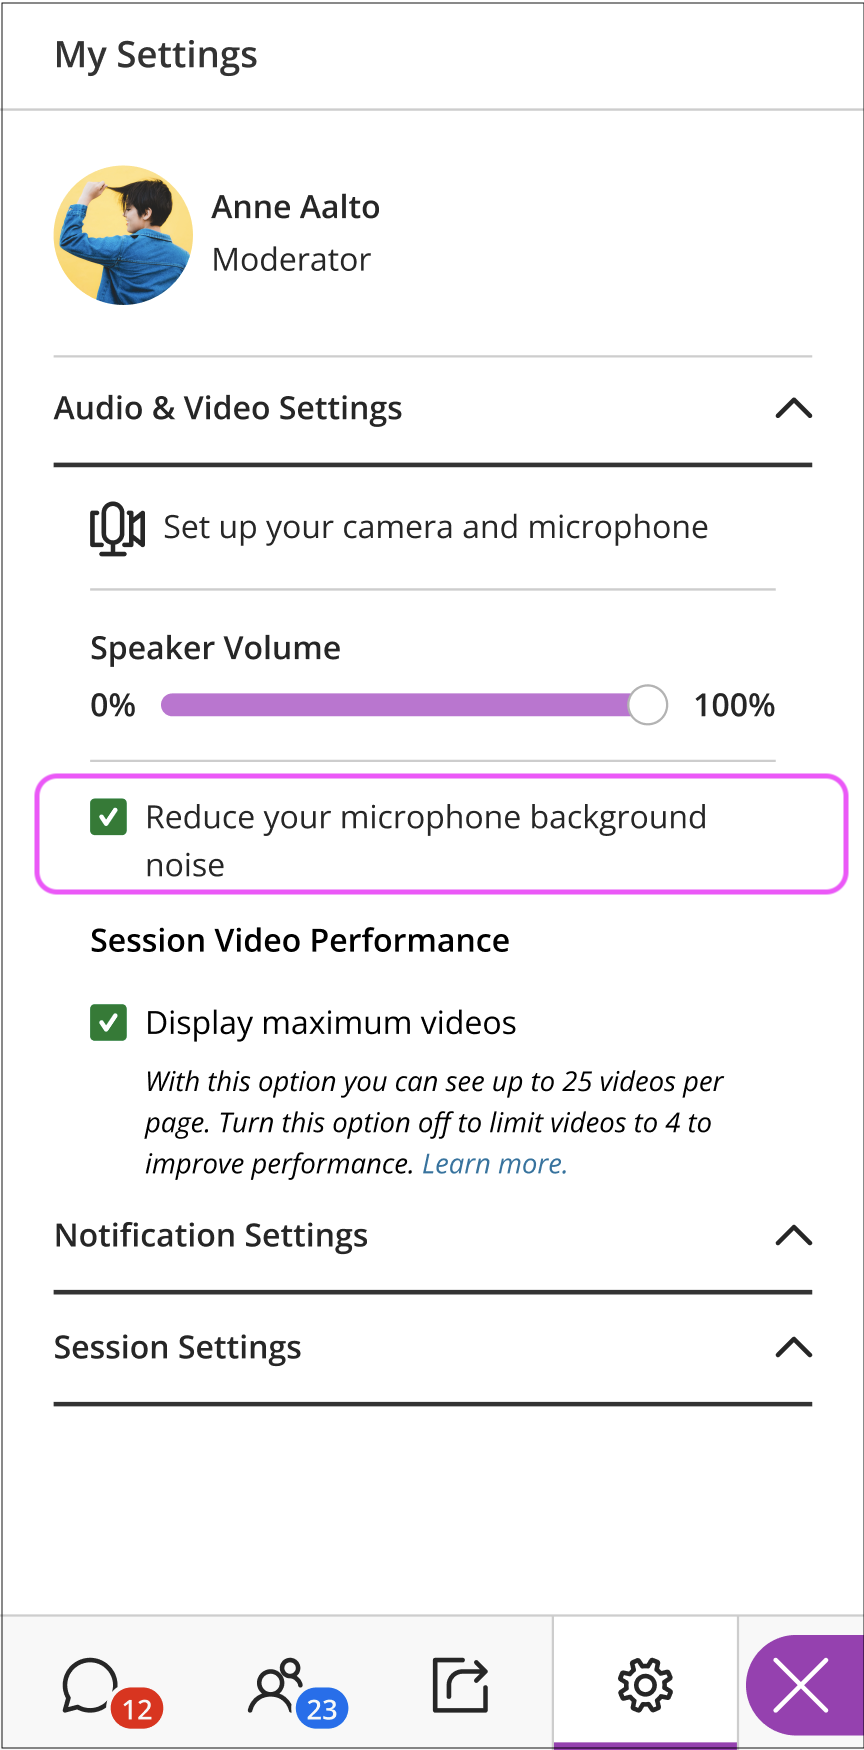 Open Collaborate panel with Audio and Video Settings expanded. Reduce your microphone background noise checkbox is marked.